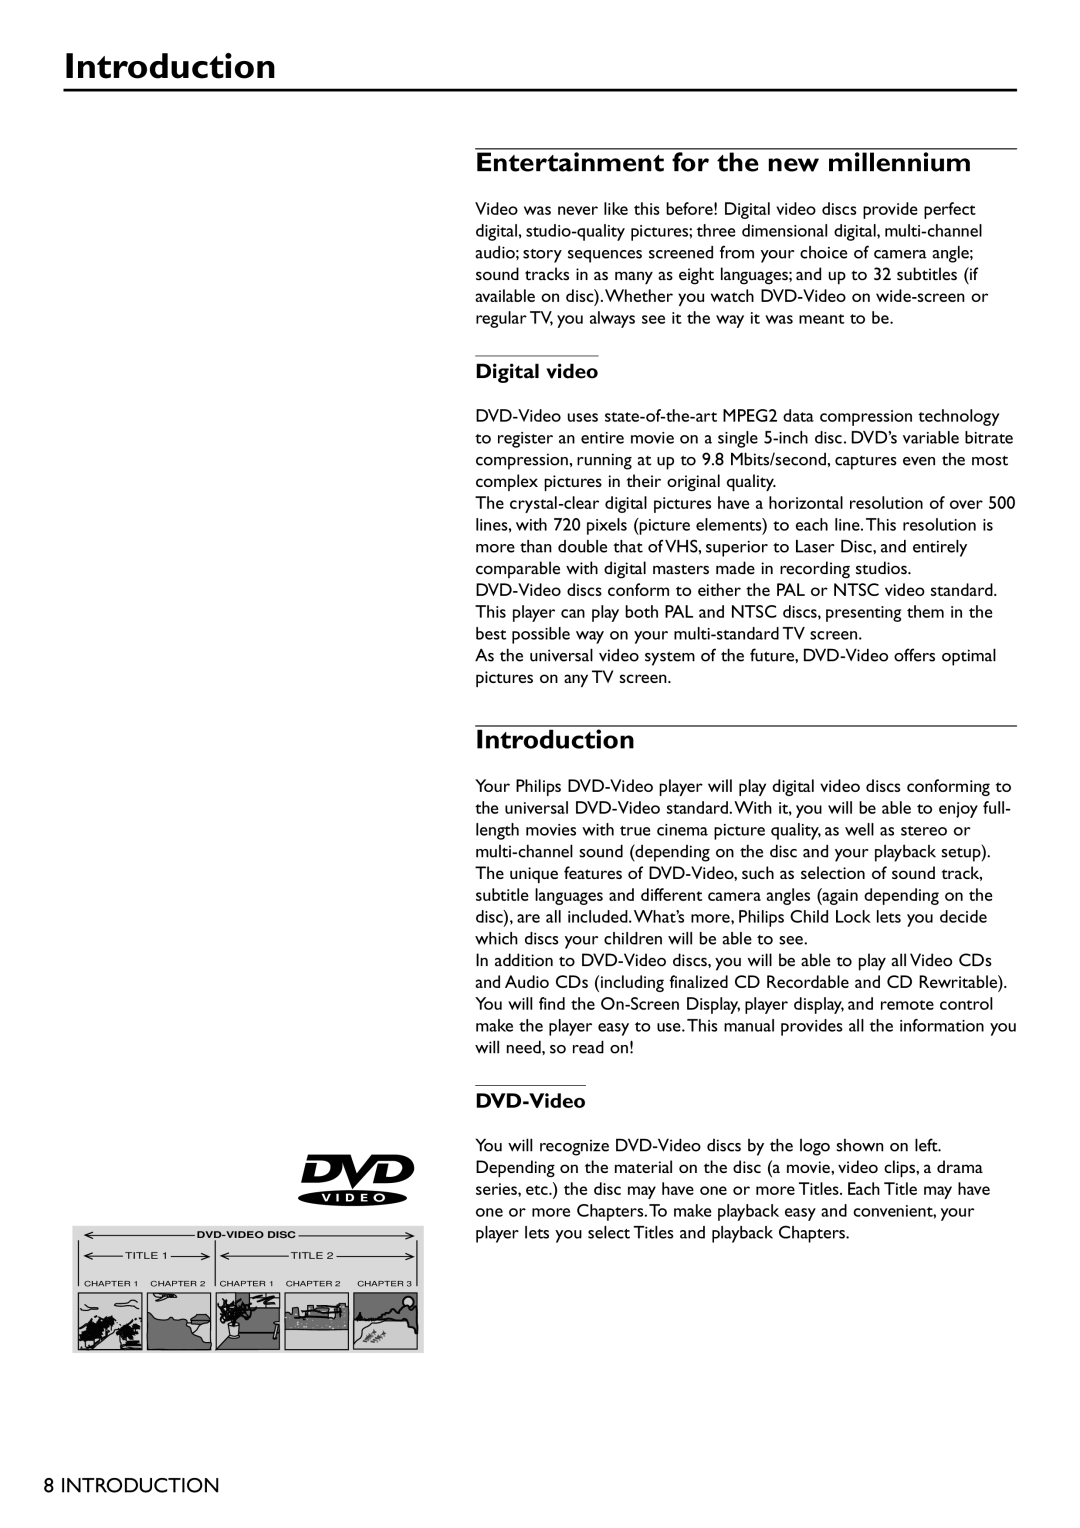 Philips DVD751 manual Introduction, Entertainment for the new millennium 